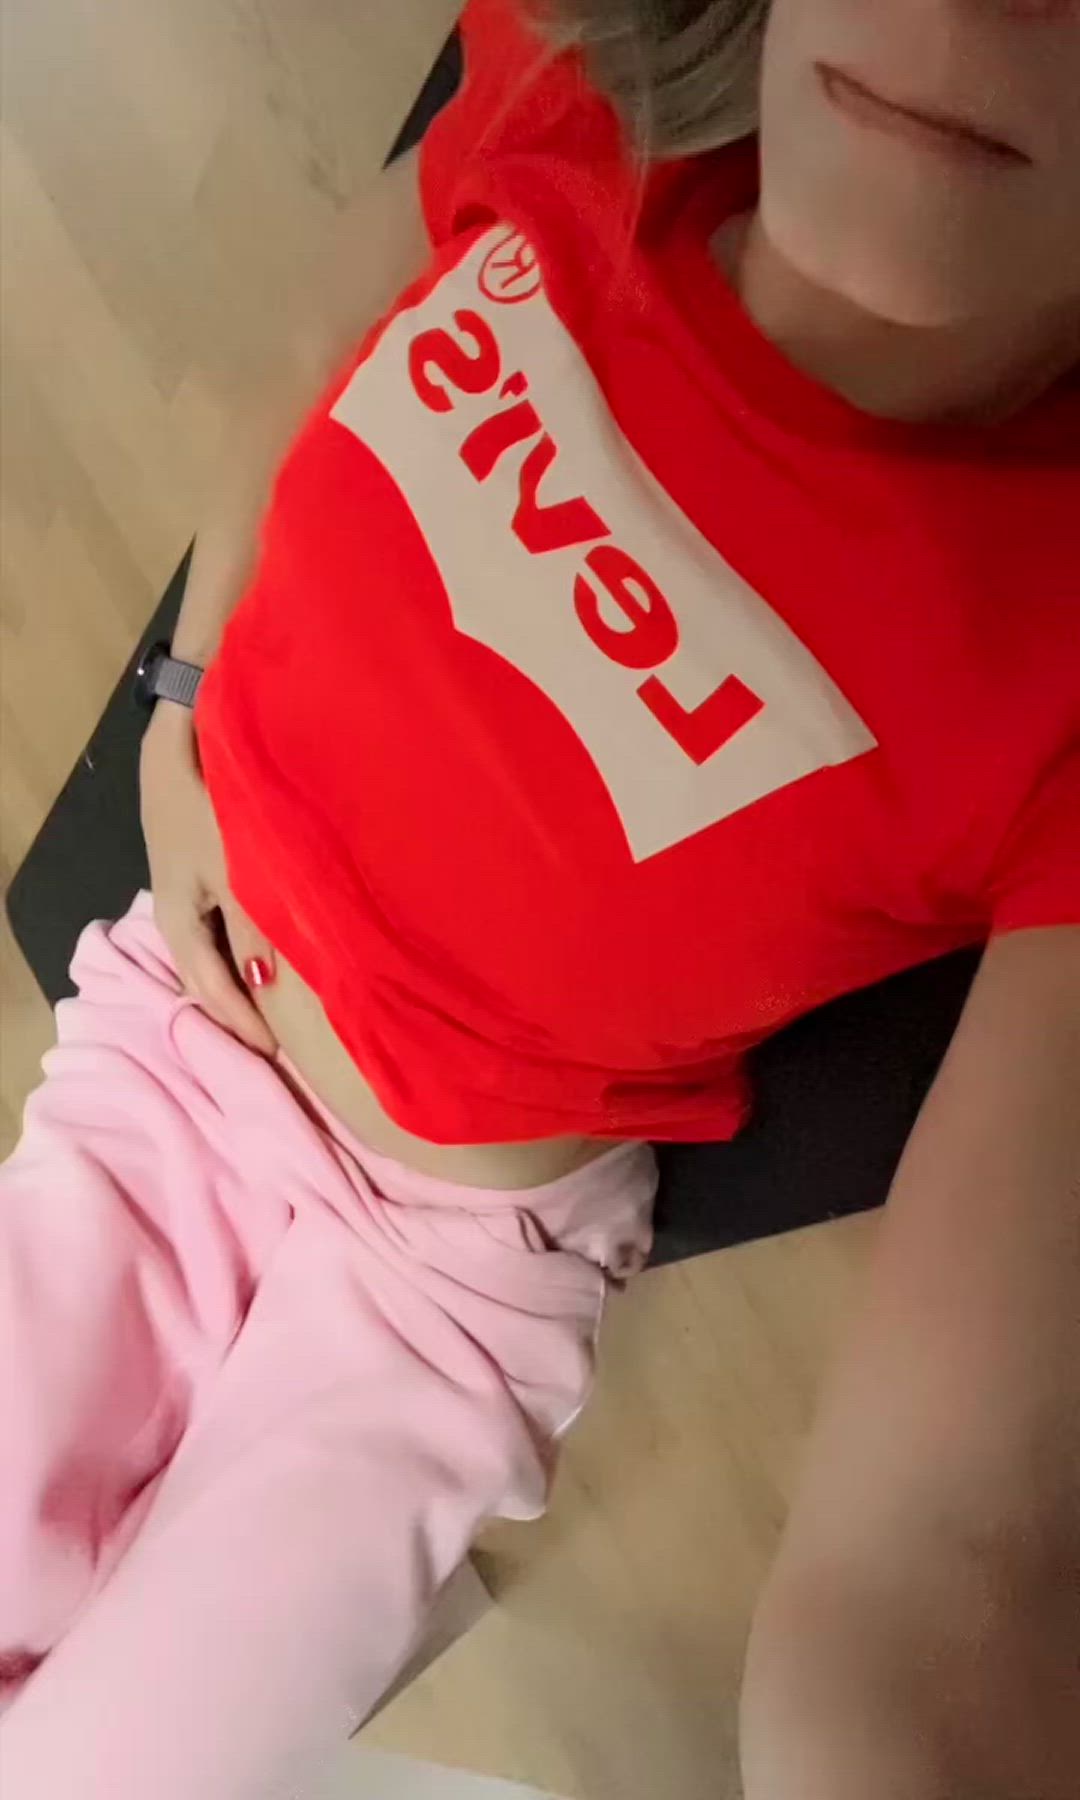 MILF porn video with onlyfans model swedishblossom <strong>@swedishblossom</strong>